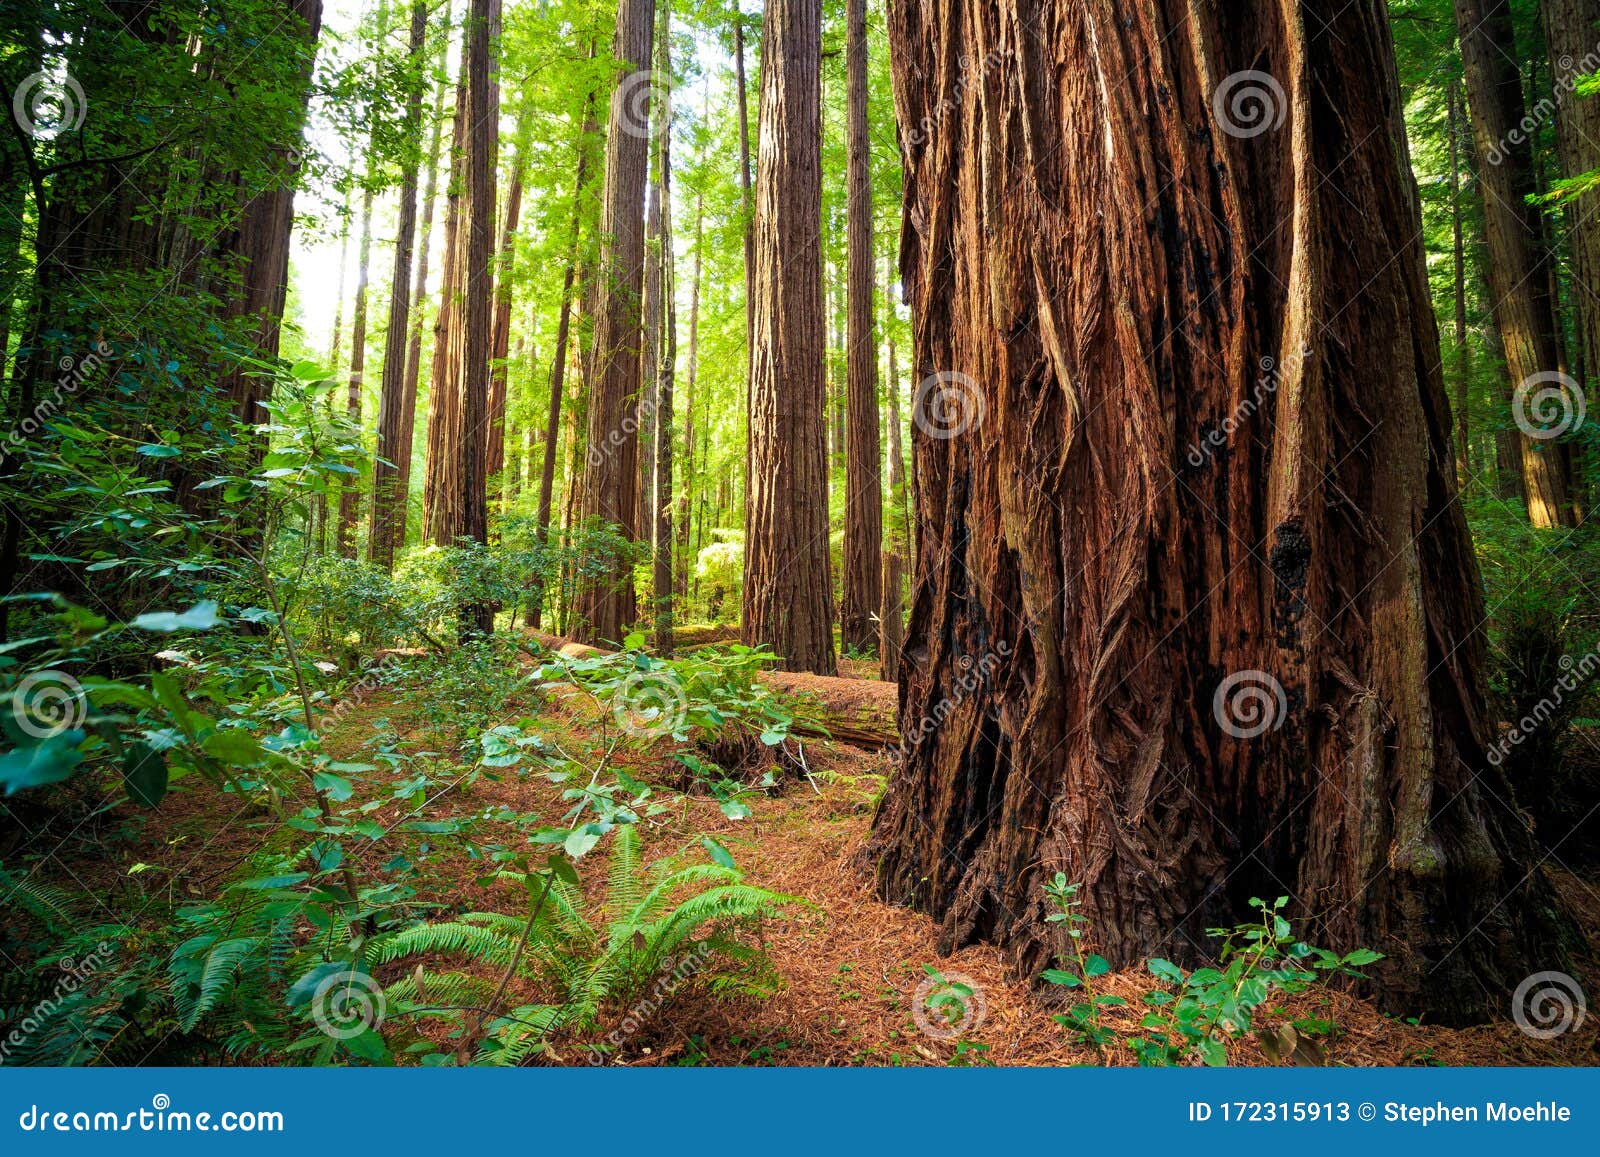 views in the redwood forest, redwoods national & state parks california